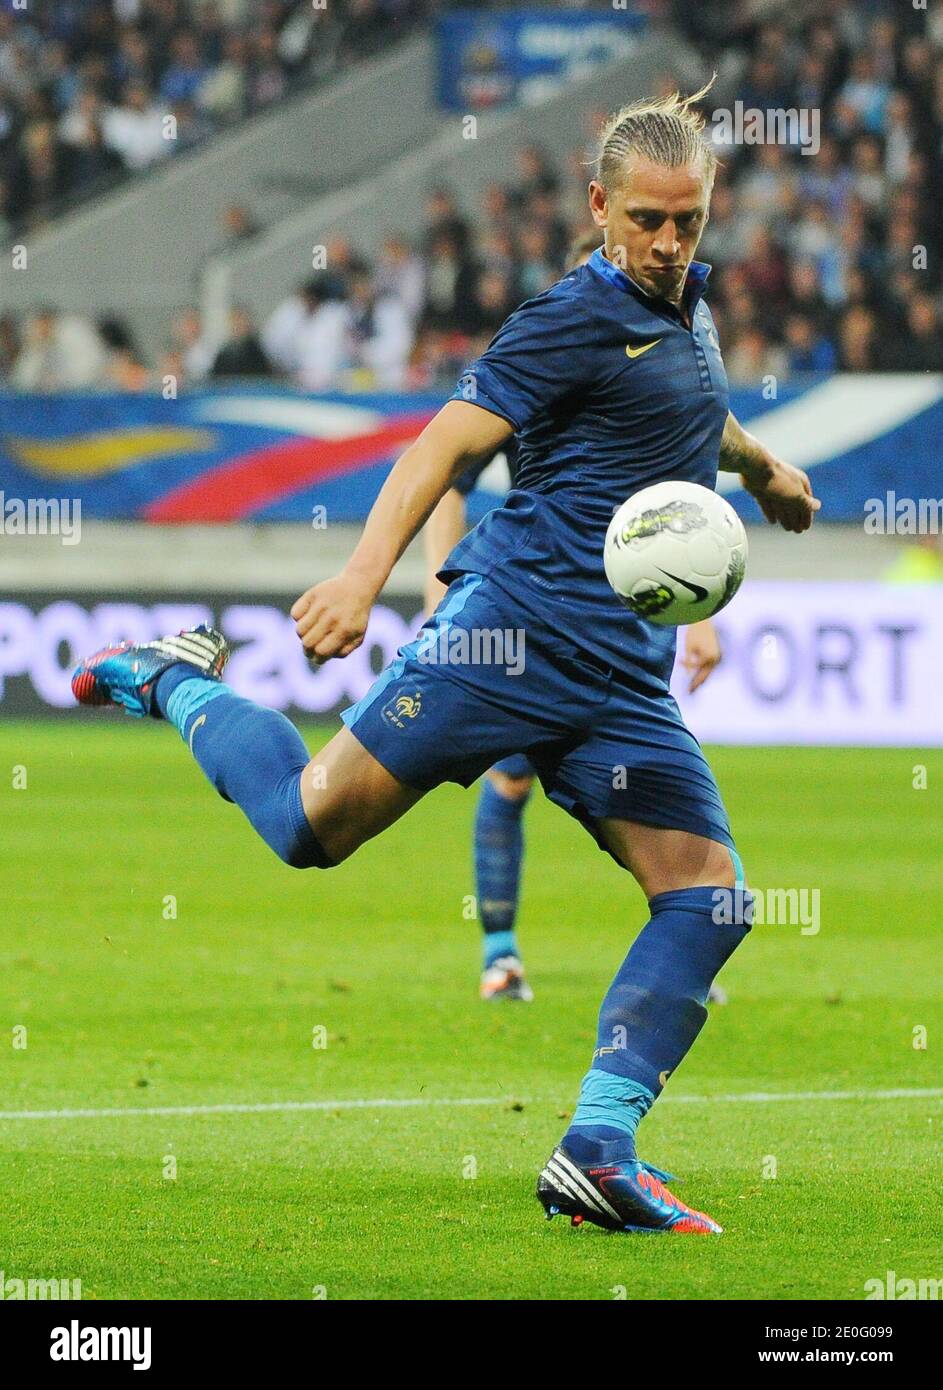 France's Philippe Mexes during an International Friendly soccer match, France Vs Estonia at MMArena stadium in Le Mans, France, on June 5, 2012. France won 4-0. Photo by ABACAPRESS.COM Stock Photo